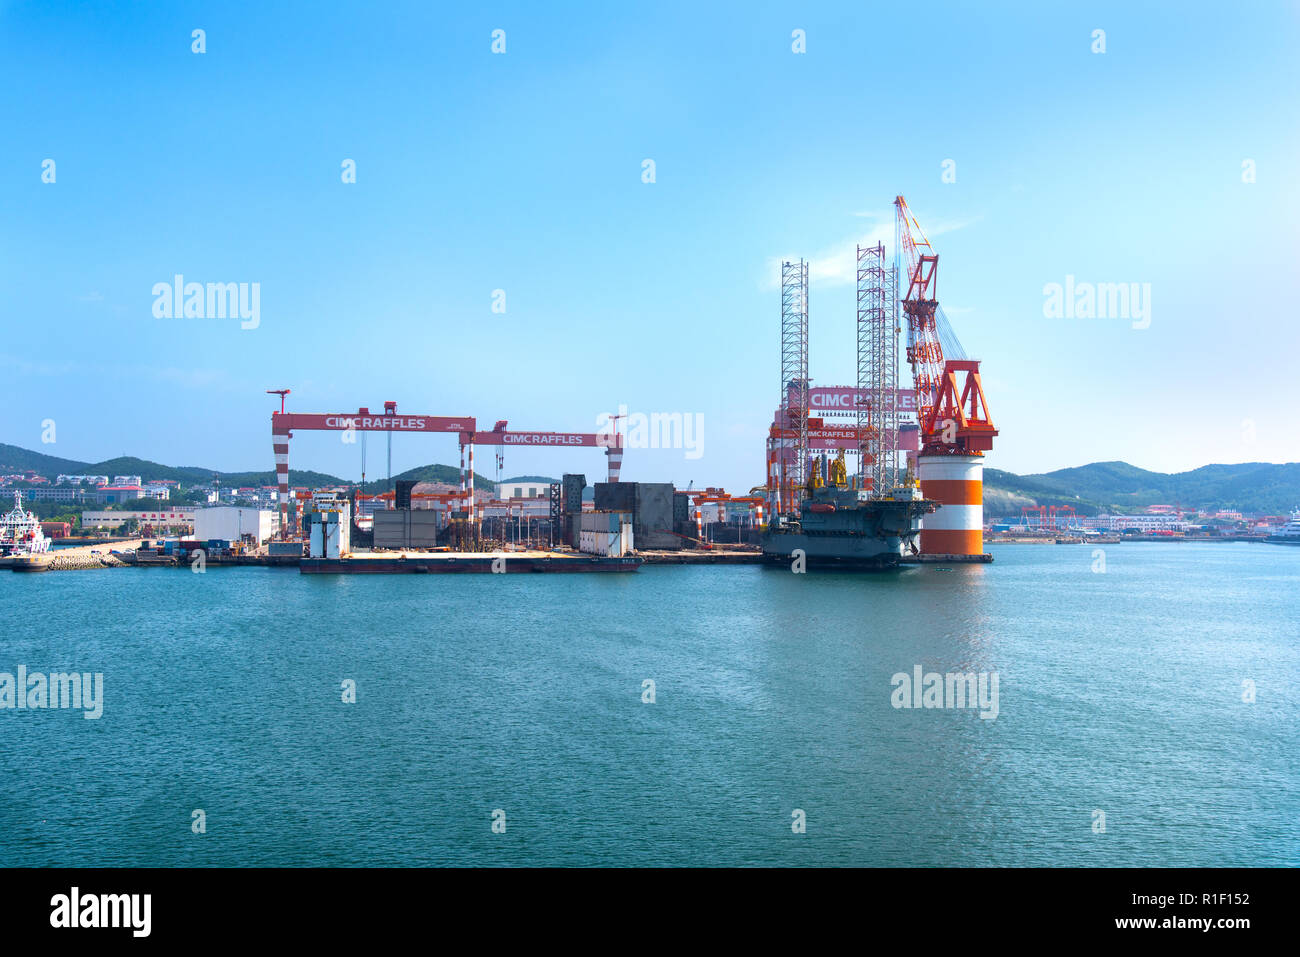 YANTAI, SHANDONG, CHINA - 21JUL2018: The CIMC Raffles Shipyard. The complex includes one of the largest dry docks in the world. Stock Photo